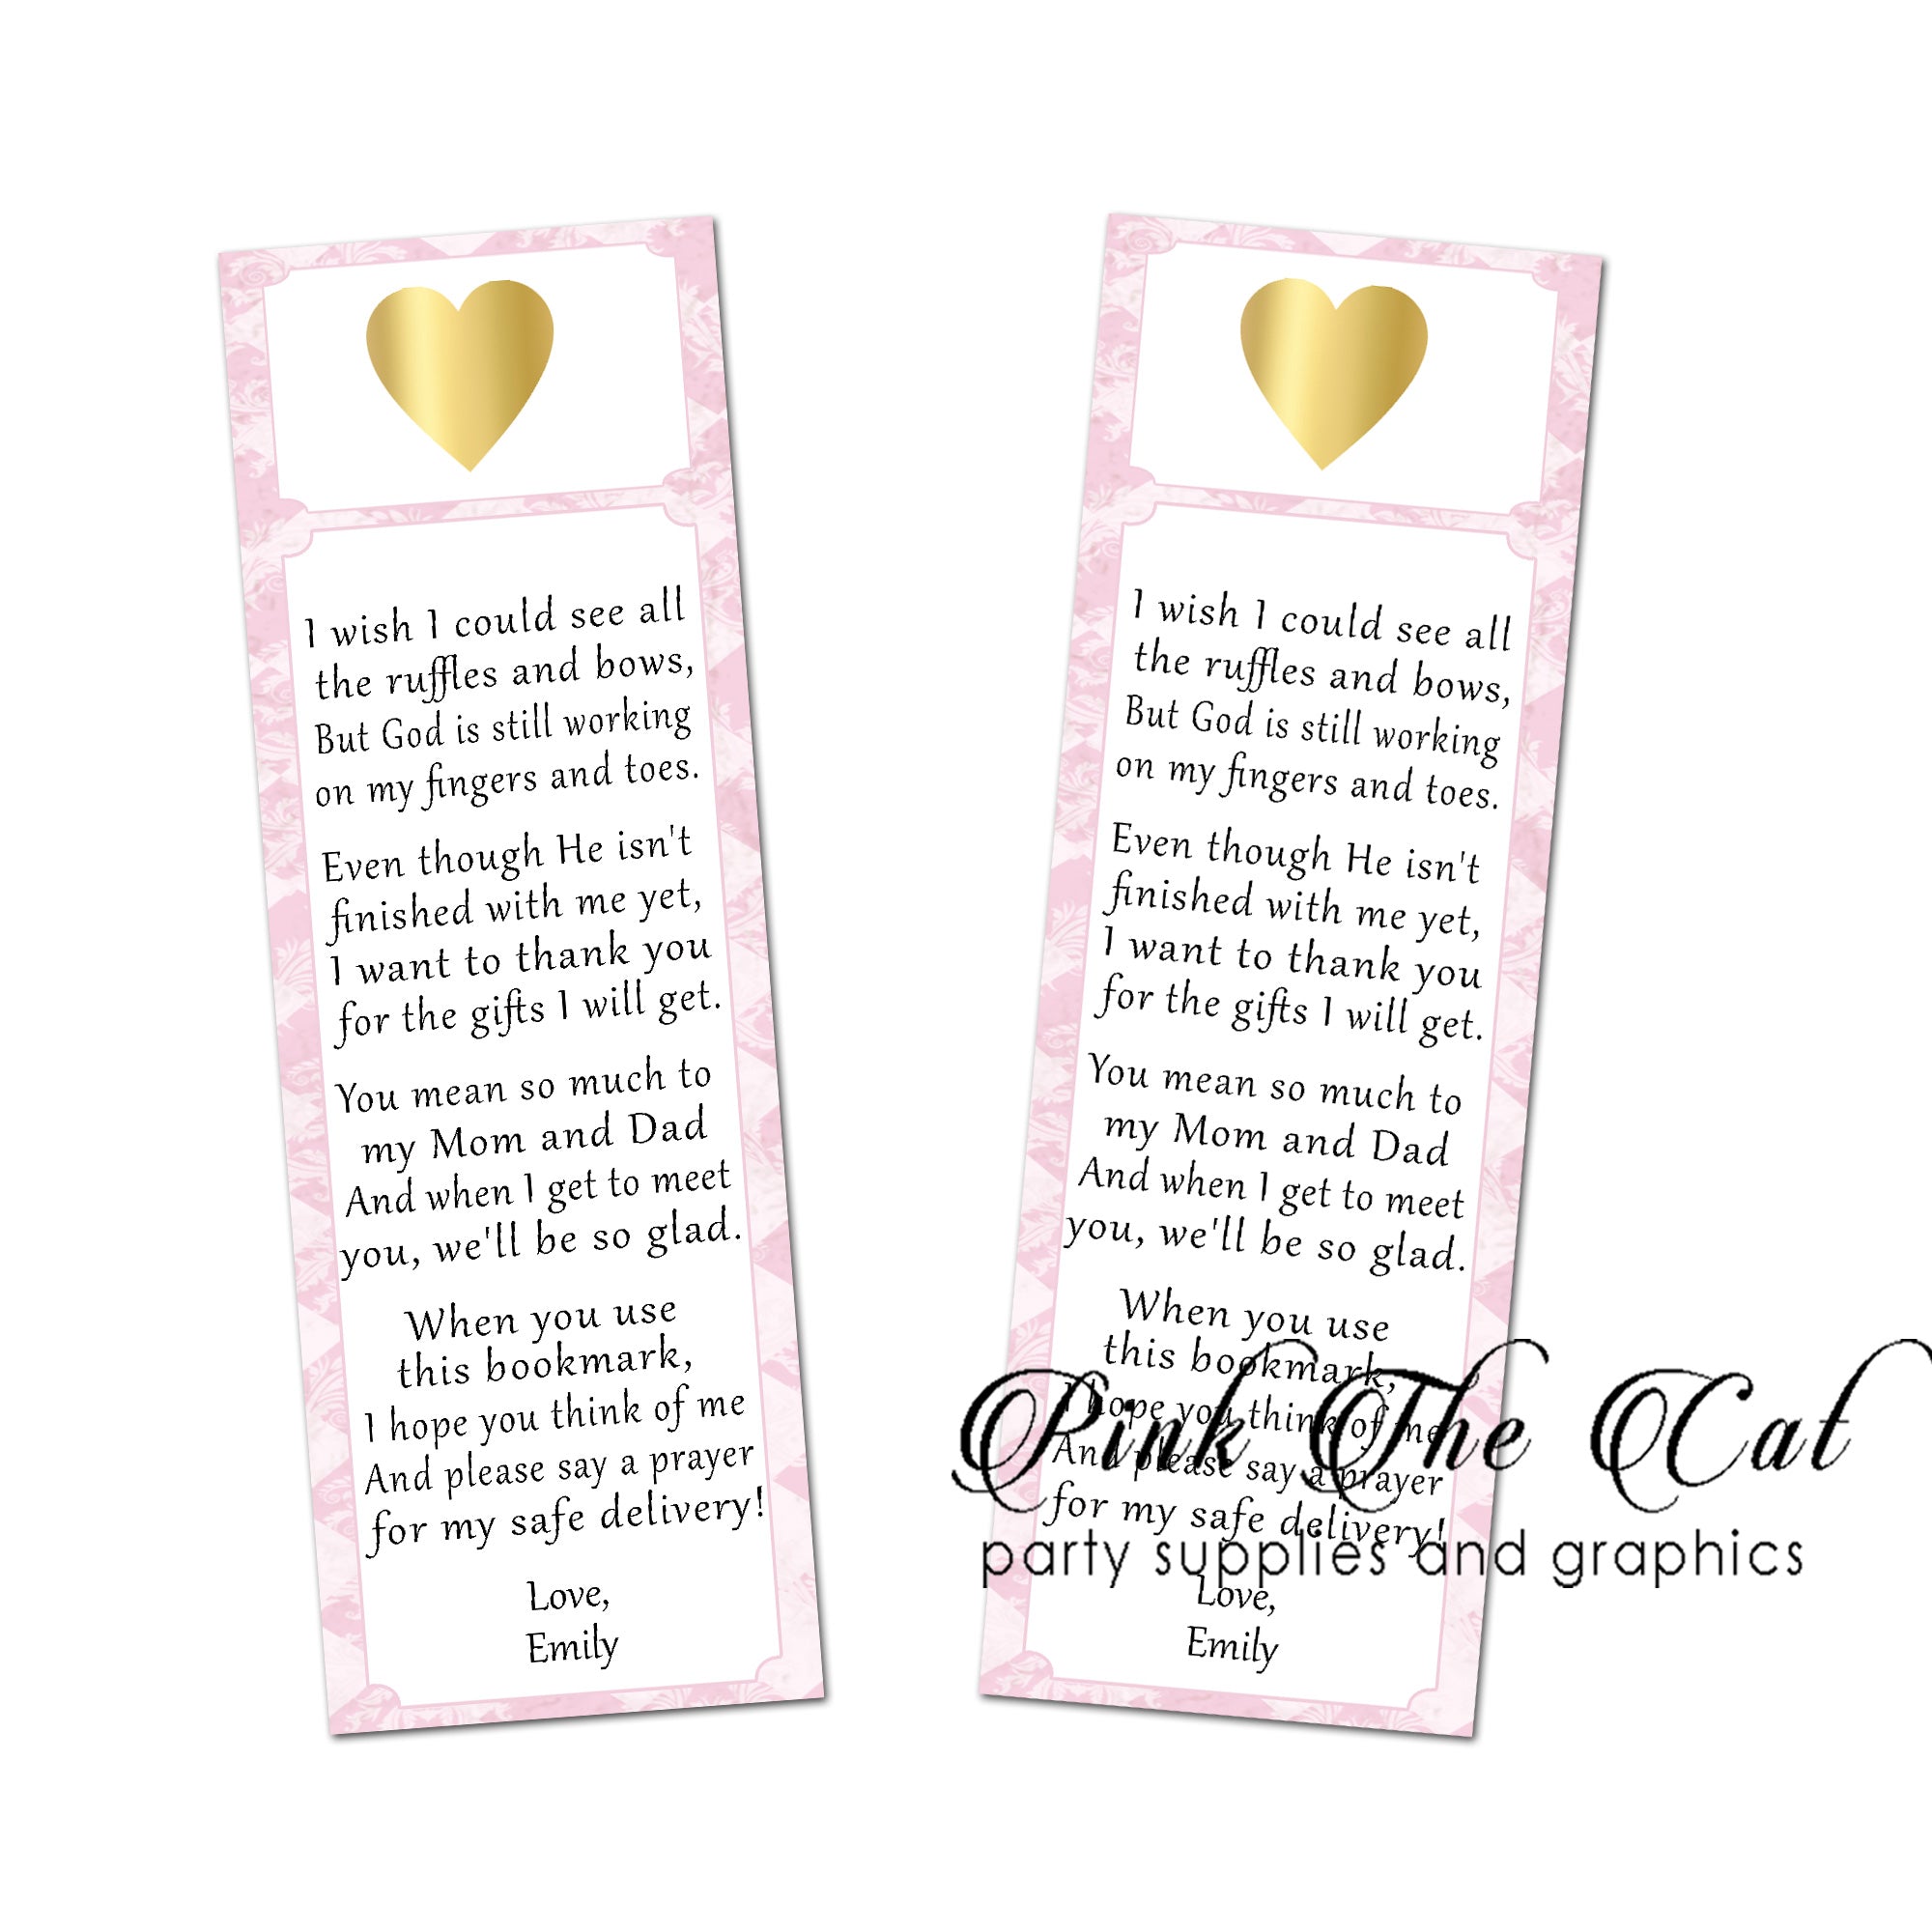 25 Bookmarks Pink Gold Heart Baby Shower Personalized